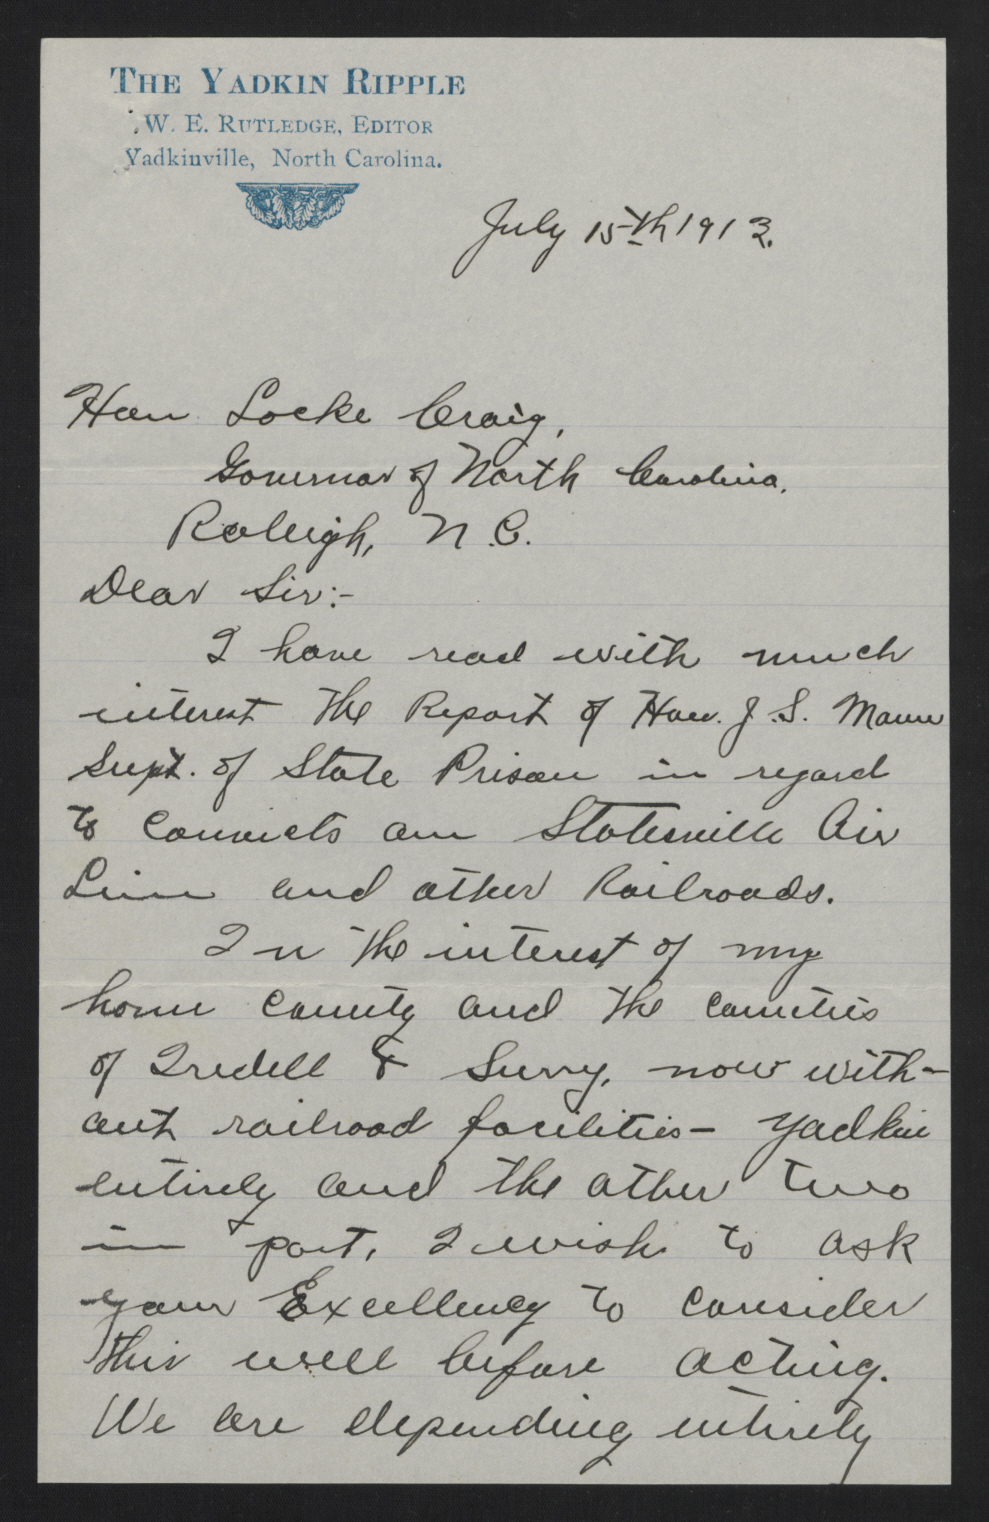 Letter from Rutledge to Craig, July 15, 1913, page 1